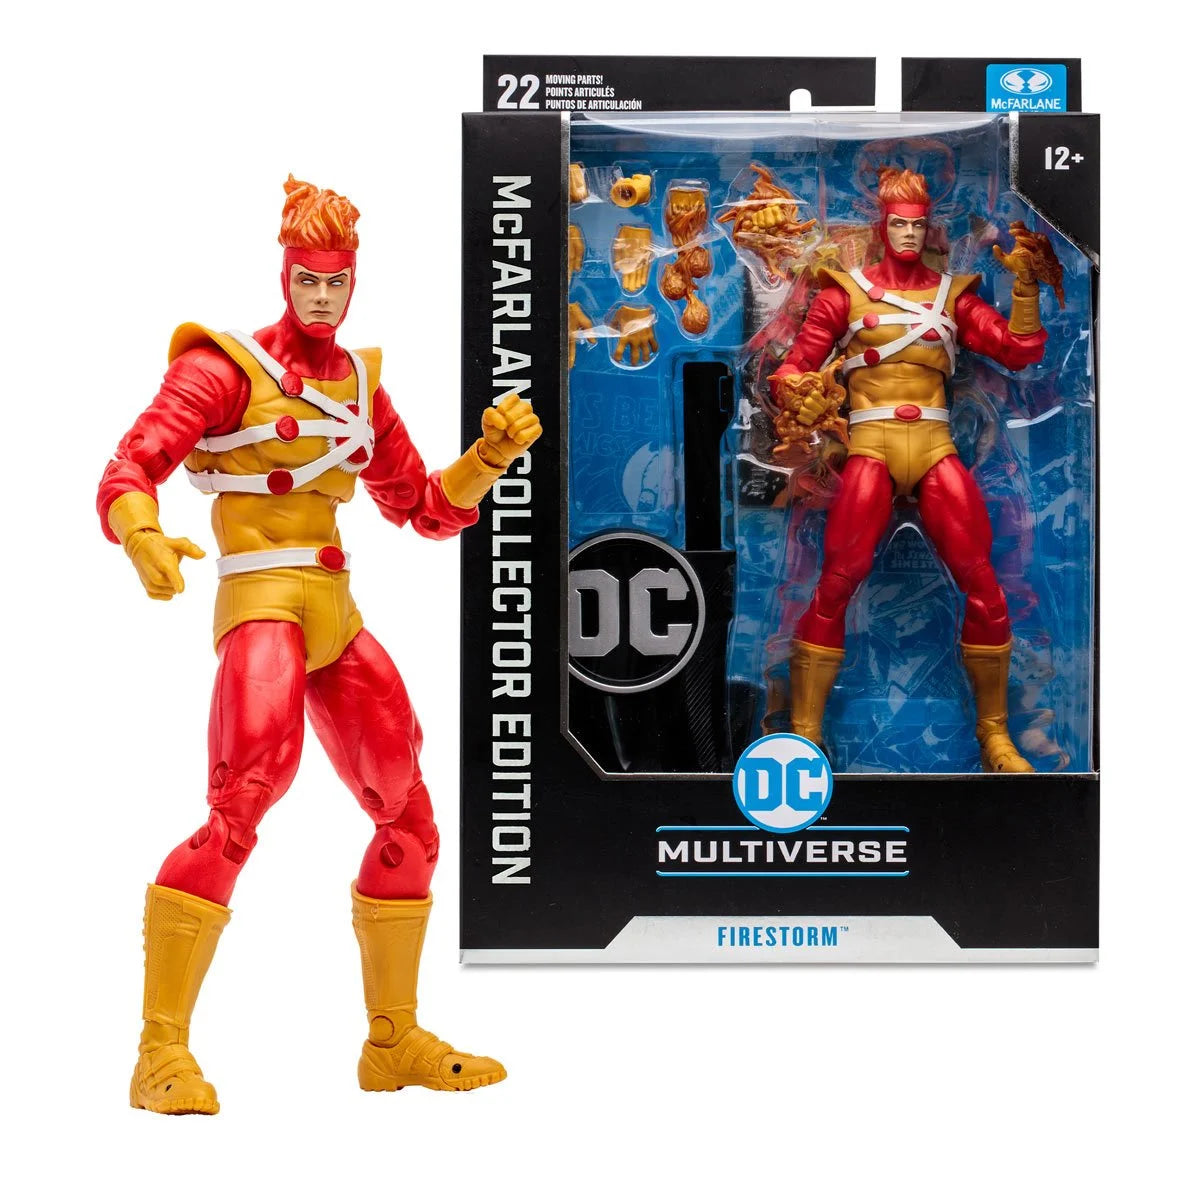  DC McFarlane Collector Edition Wave 2 Firestorm Crisis on Infinite Earths 7-Inch Scale Action Figure